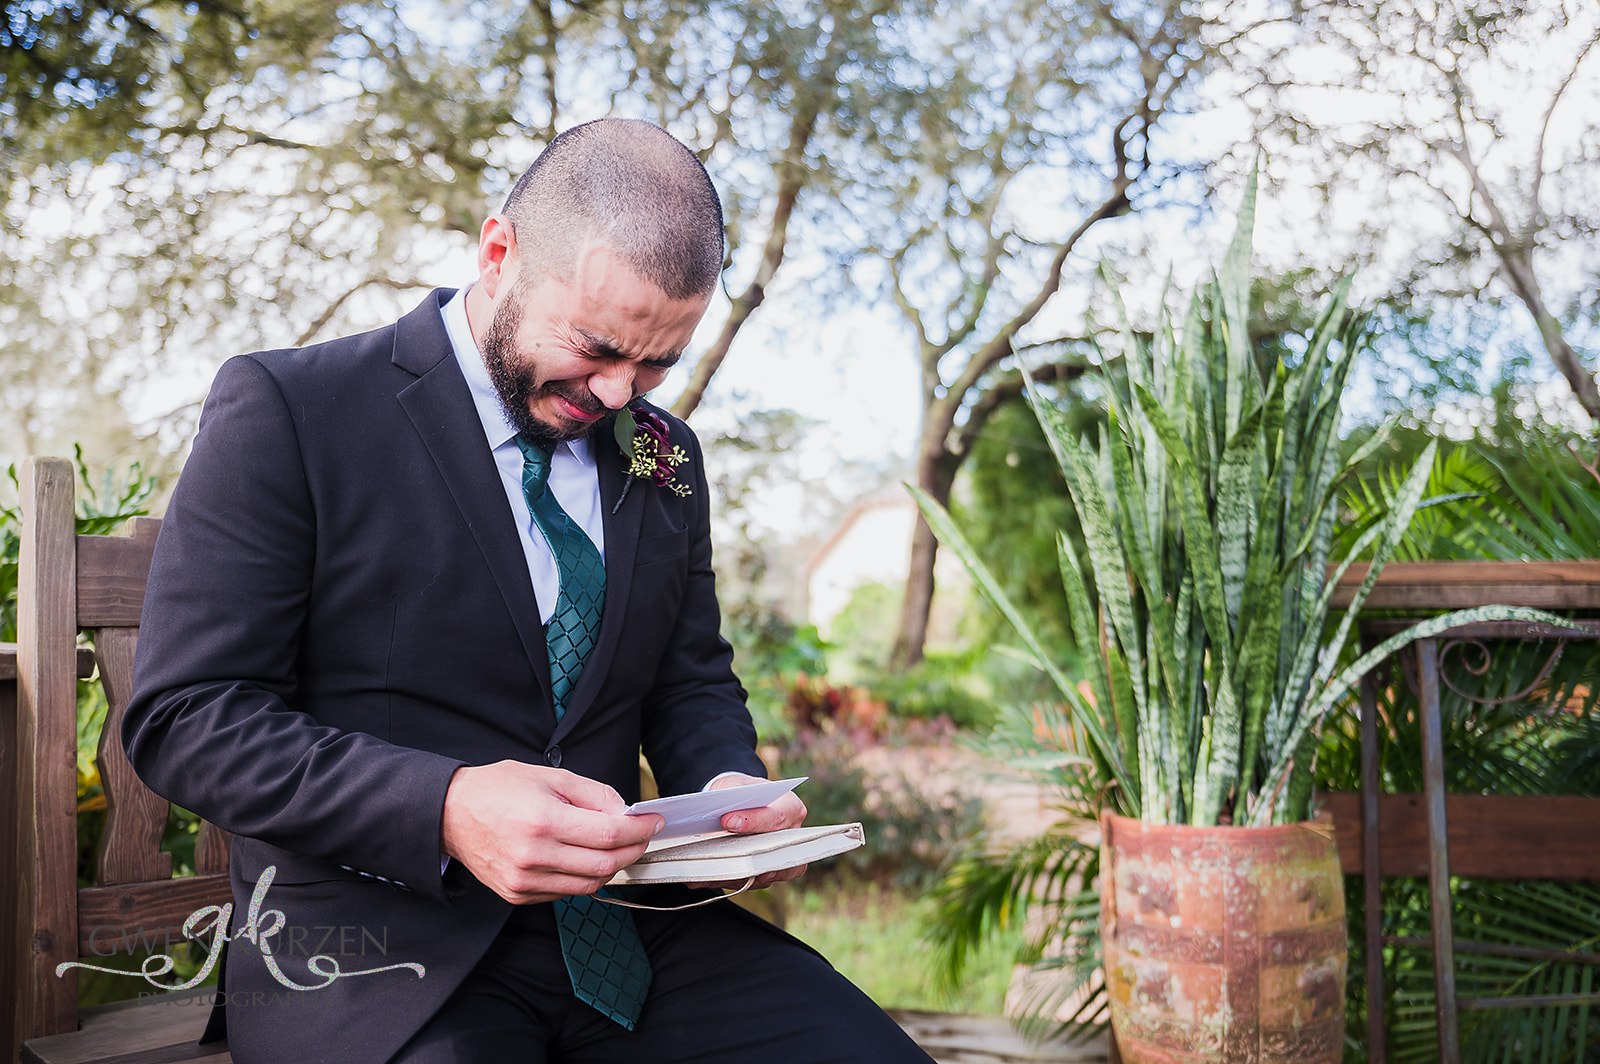 The-Emotional-Groom-Reading-A-Letter-From-His-Bride